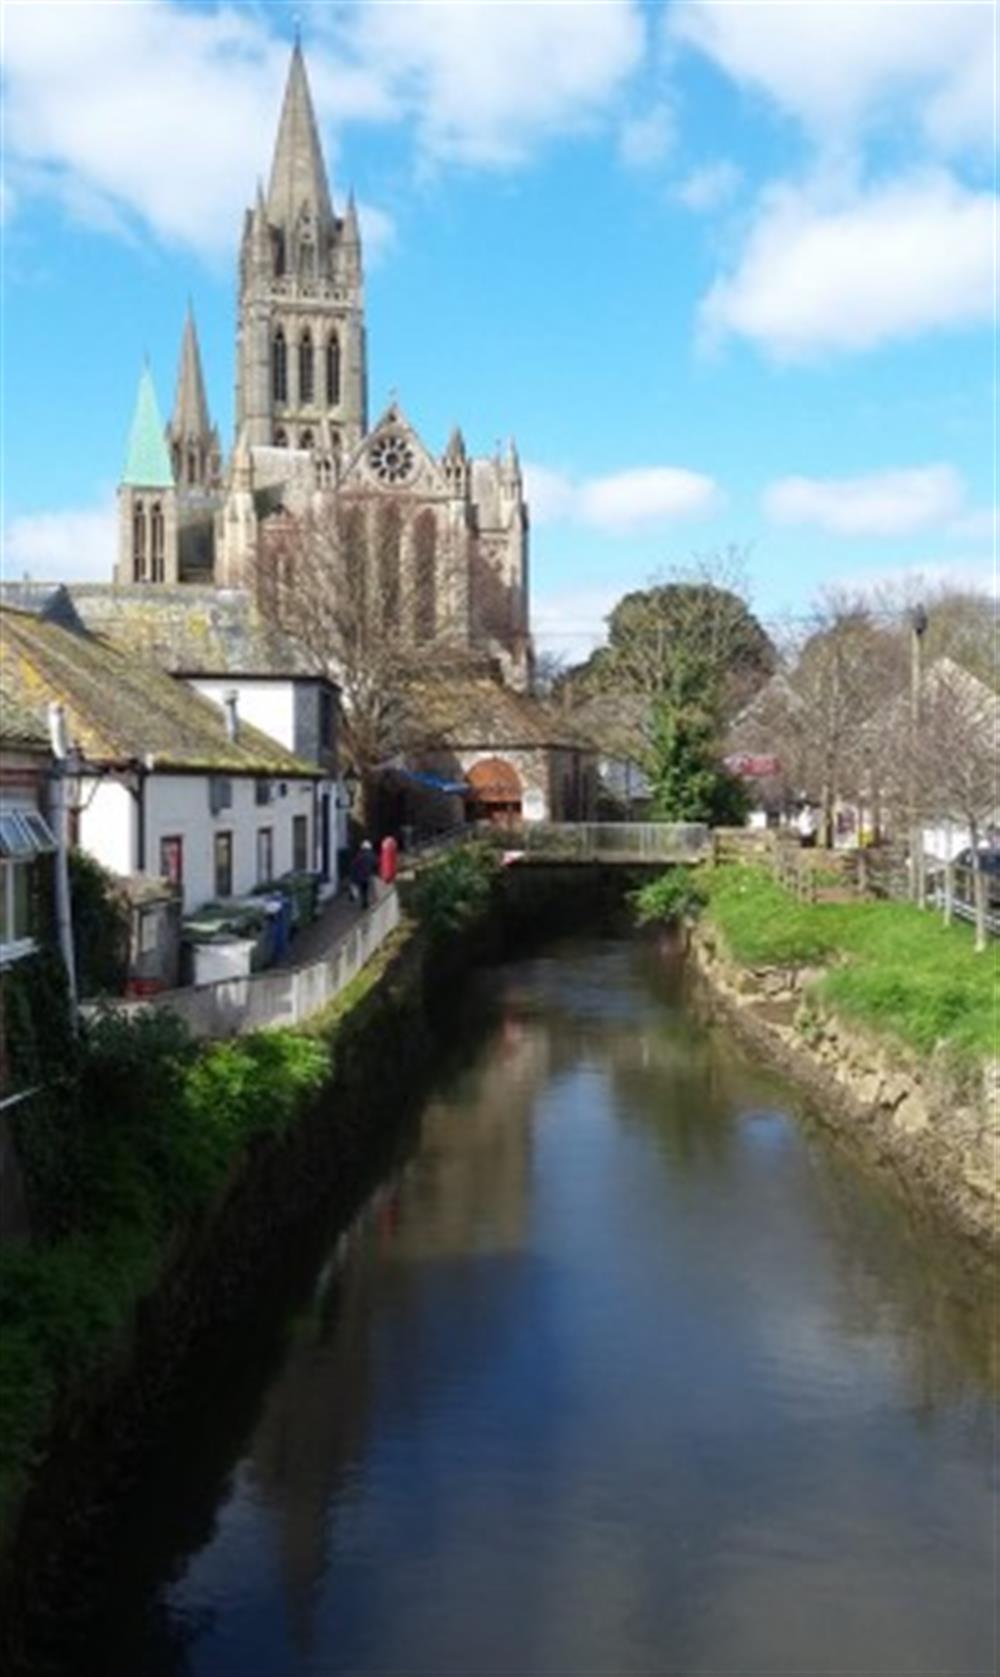 Truro is our main shopping centre, plus it's also good for cafes, pubs and the cinema.